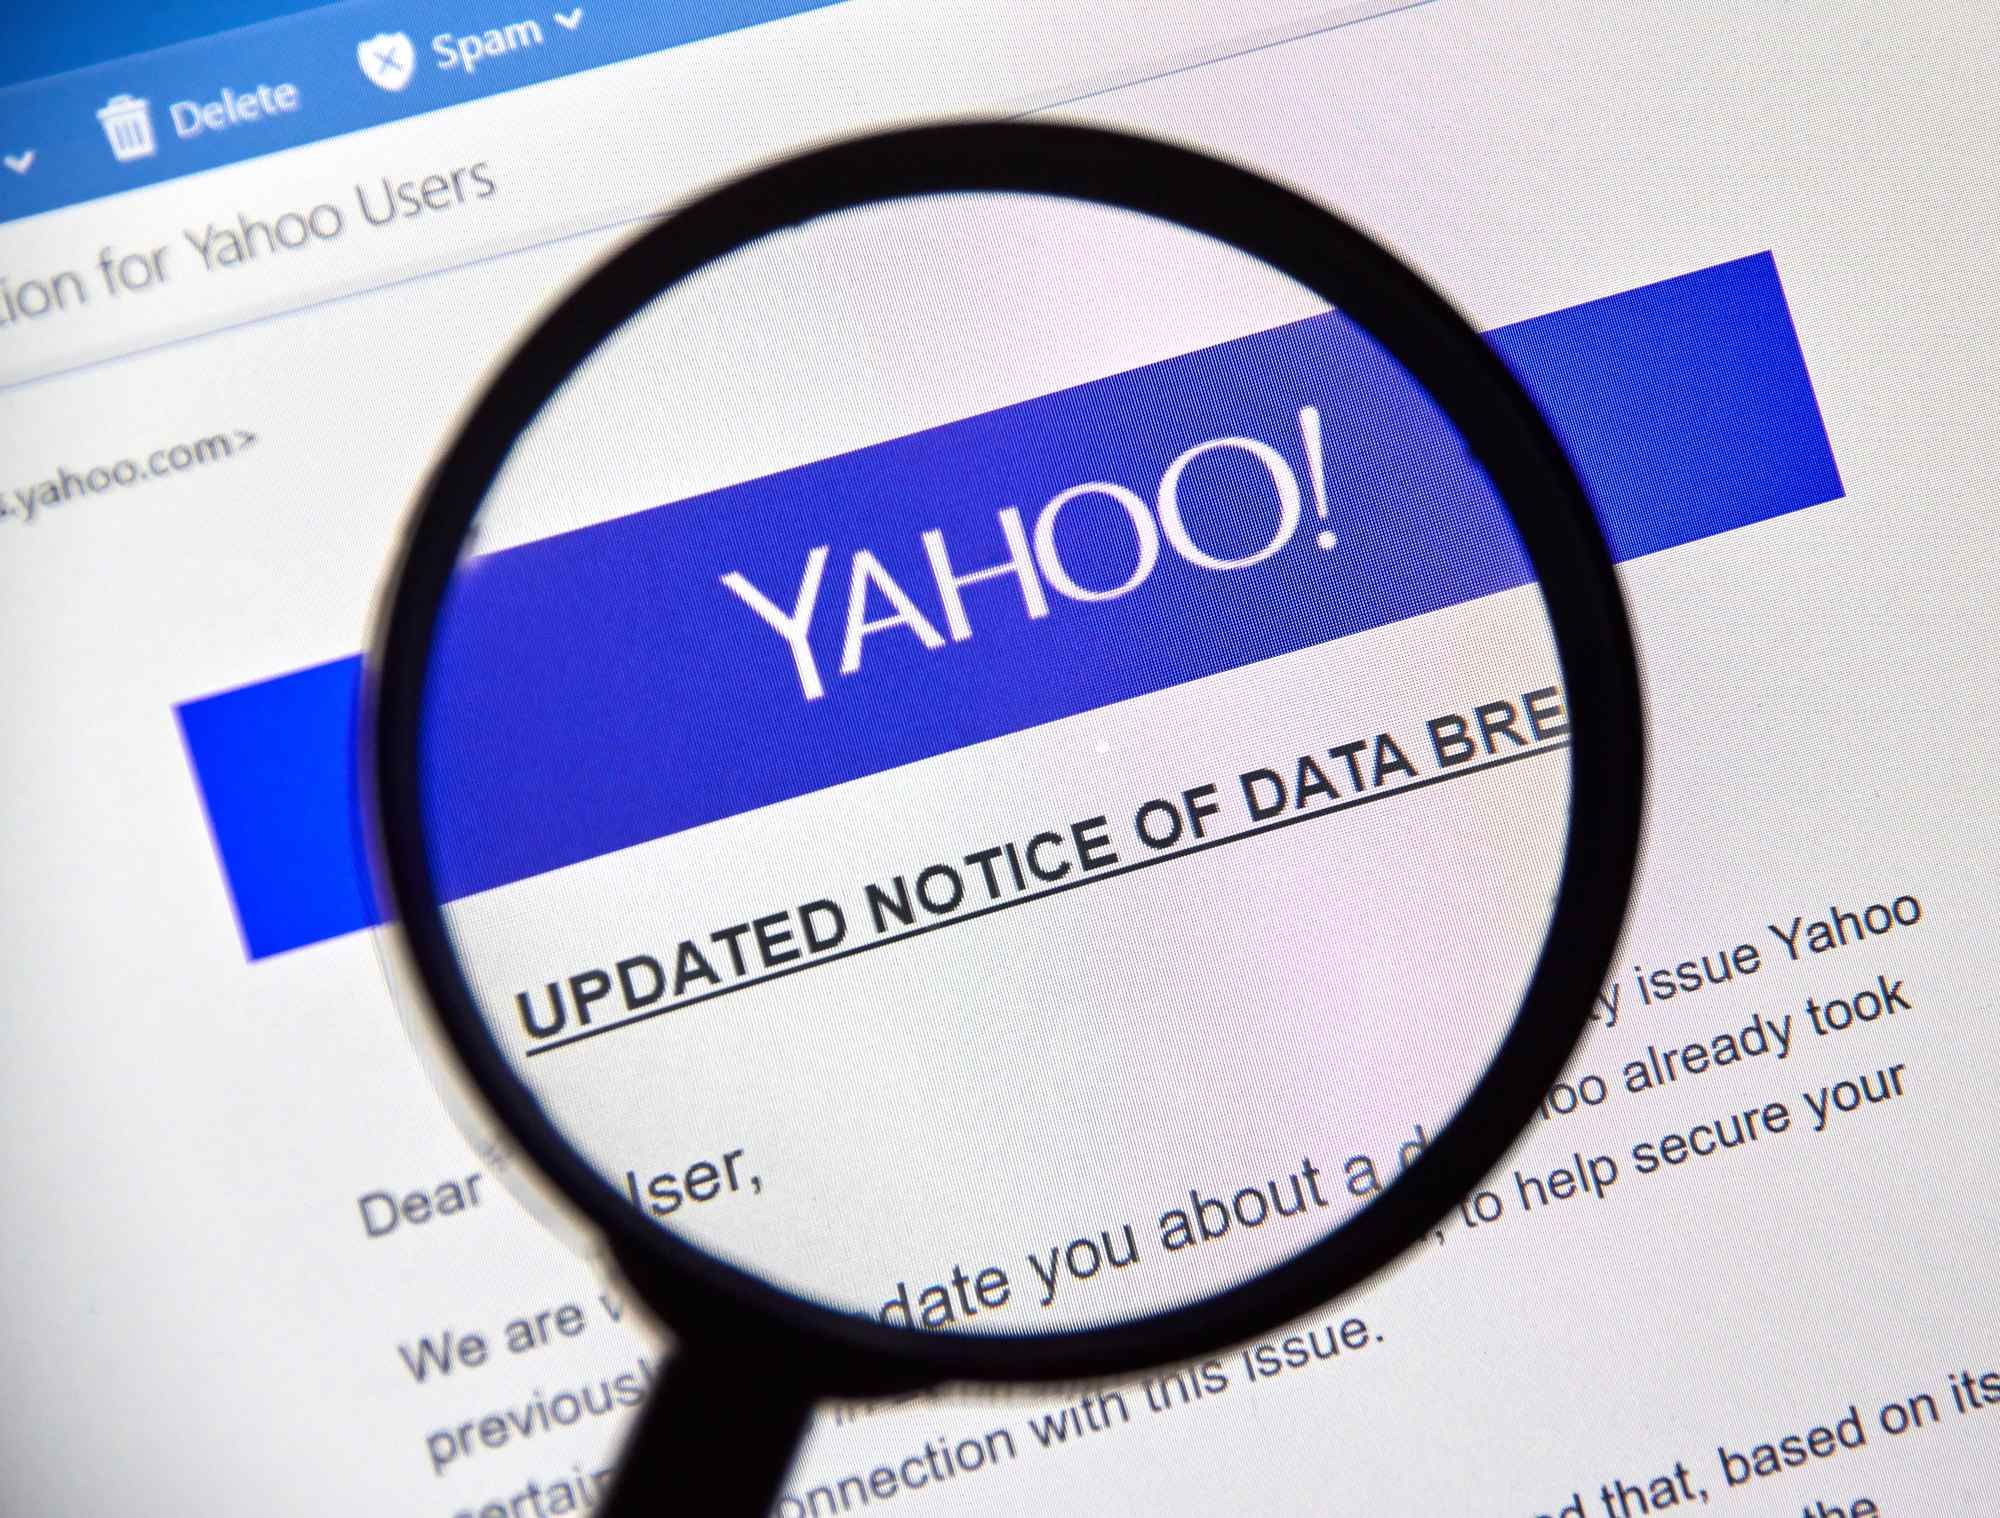 Yahoo data breach notice regarding the allocation of class action lawsuit funds